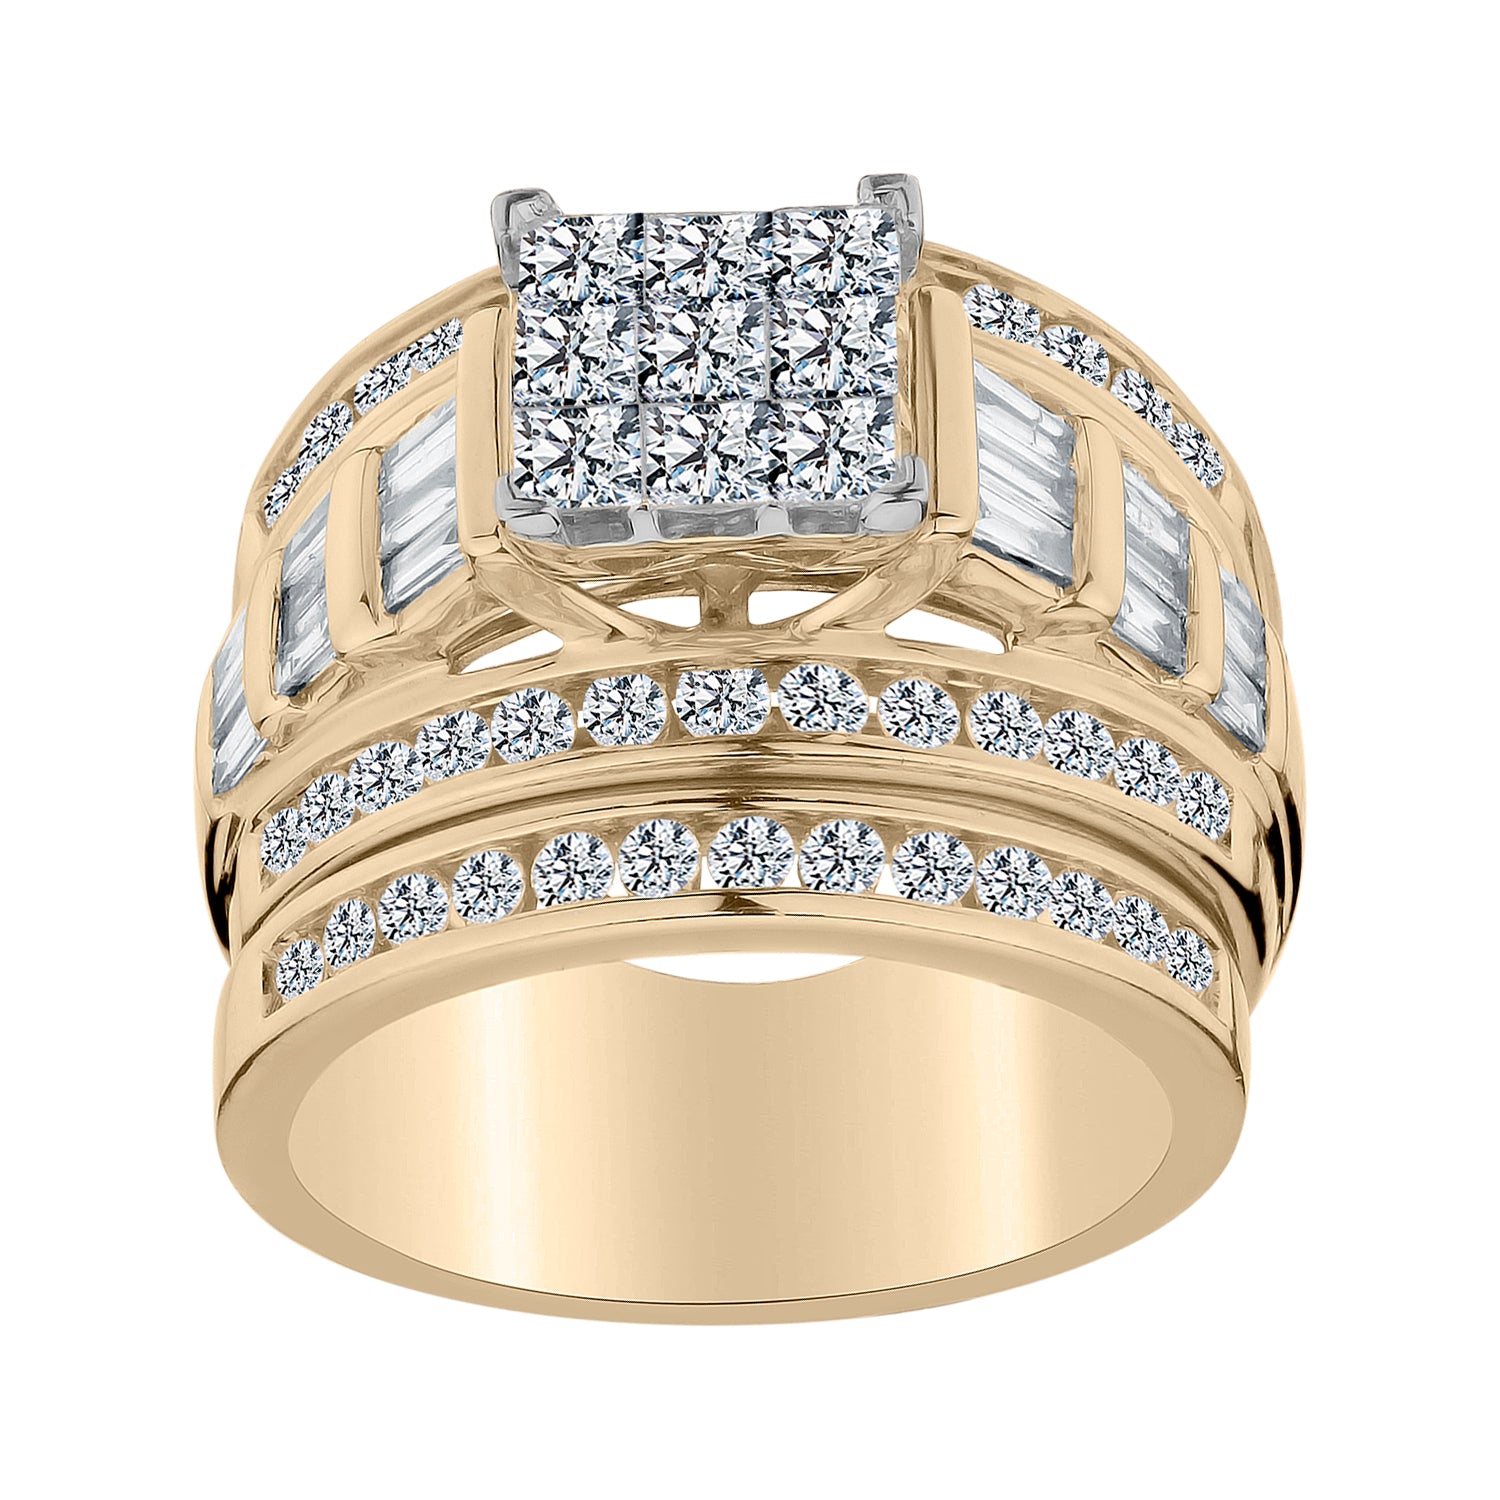 2.00 CARAT DIAMOND RING SET, 10kt YELLOW GOLD...................NOW - Griffin Jewellery Designs